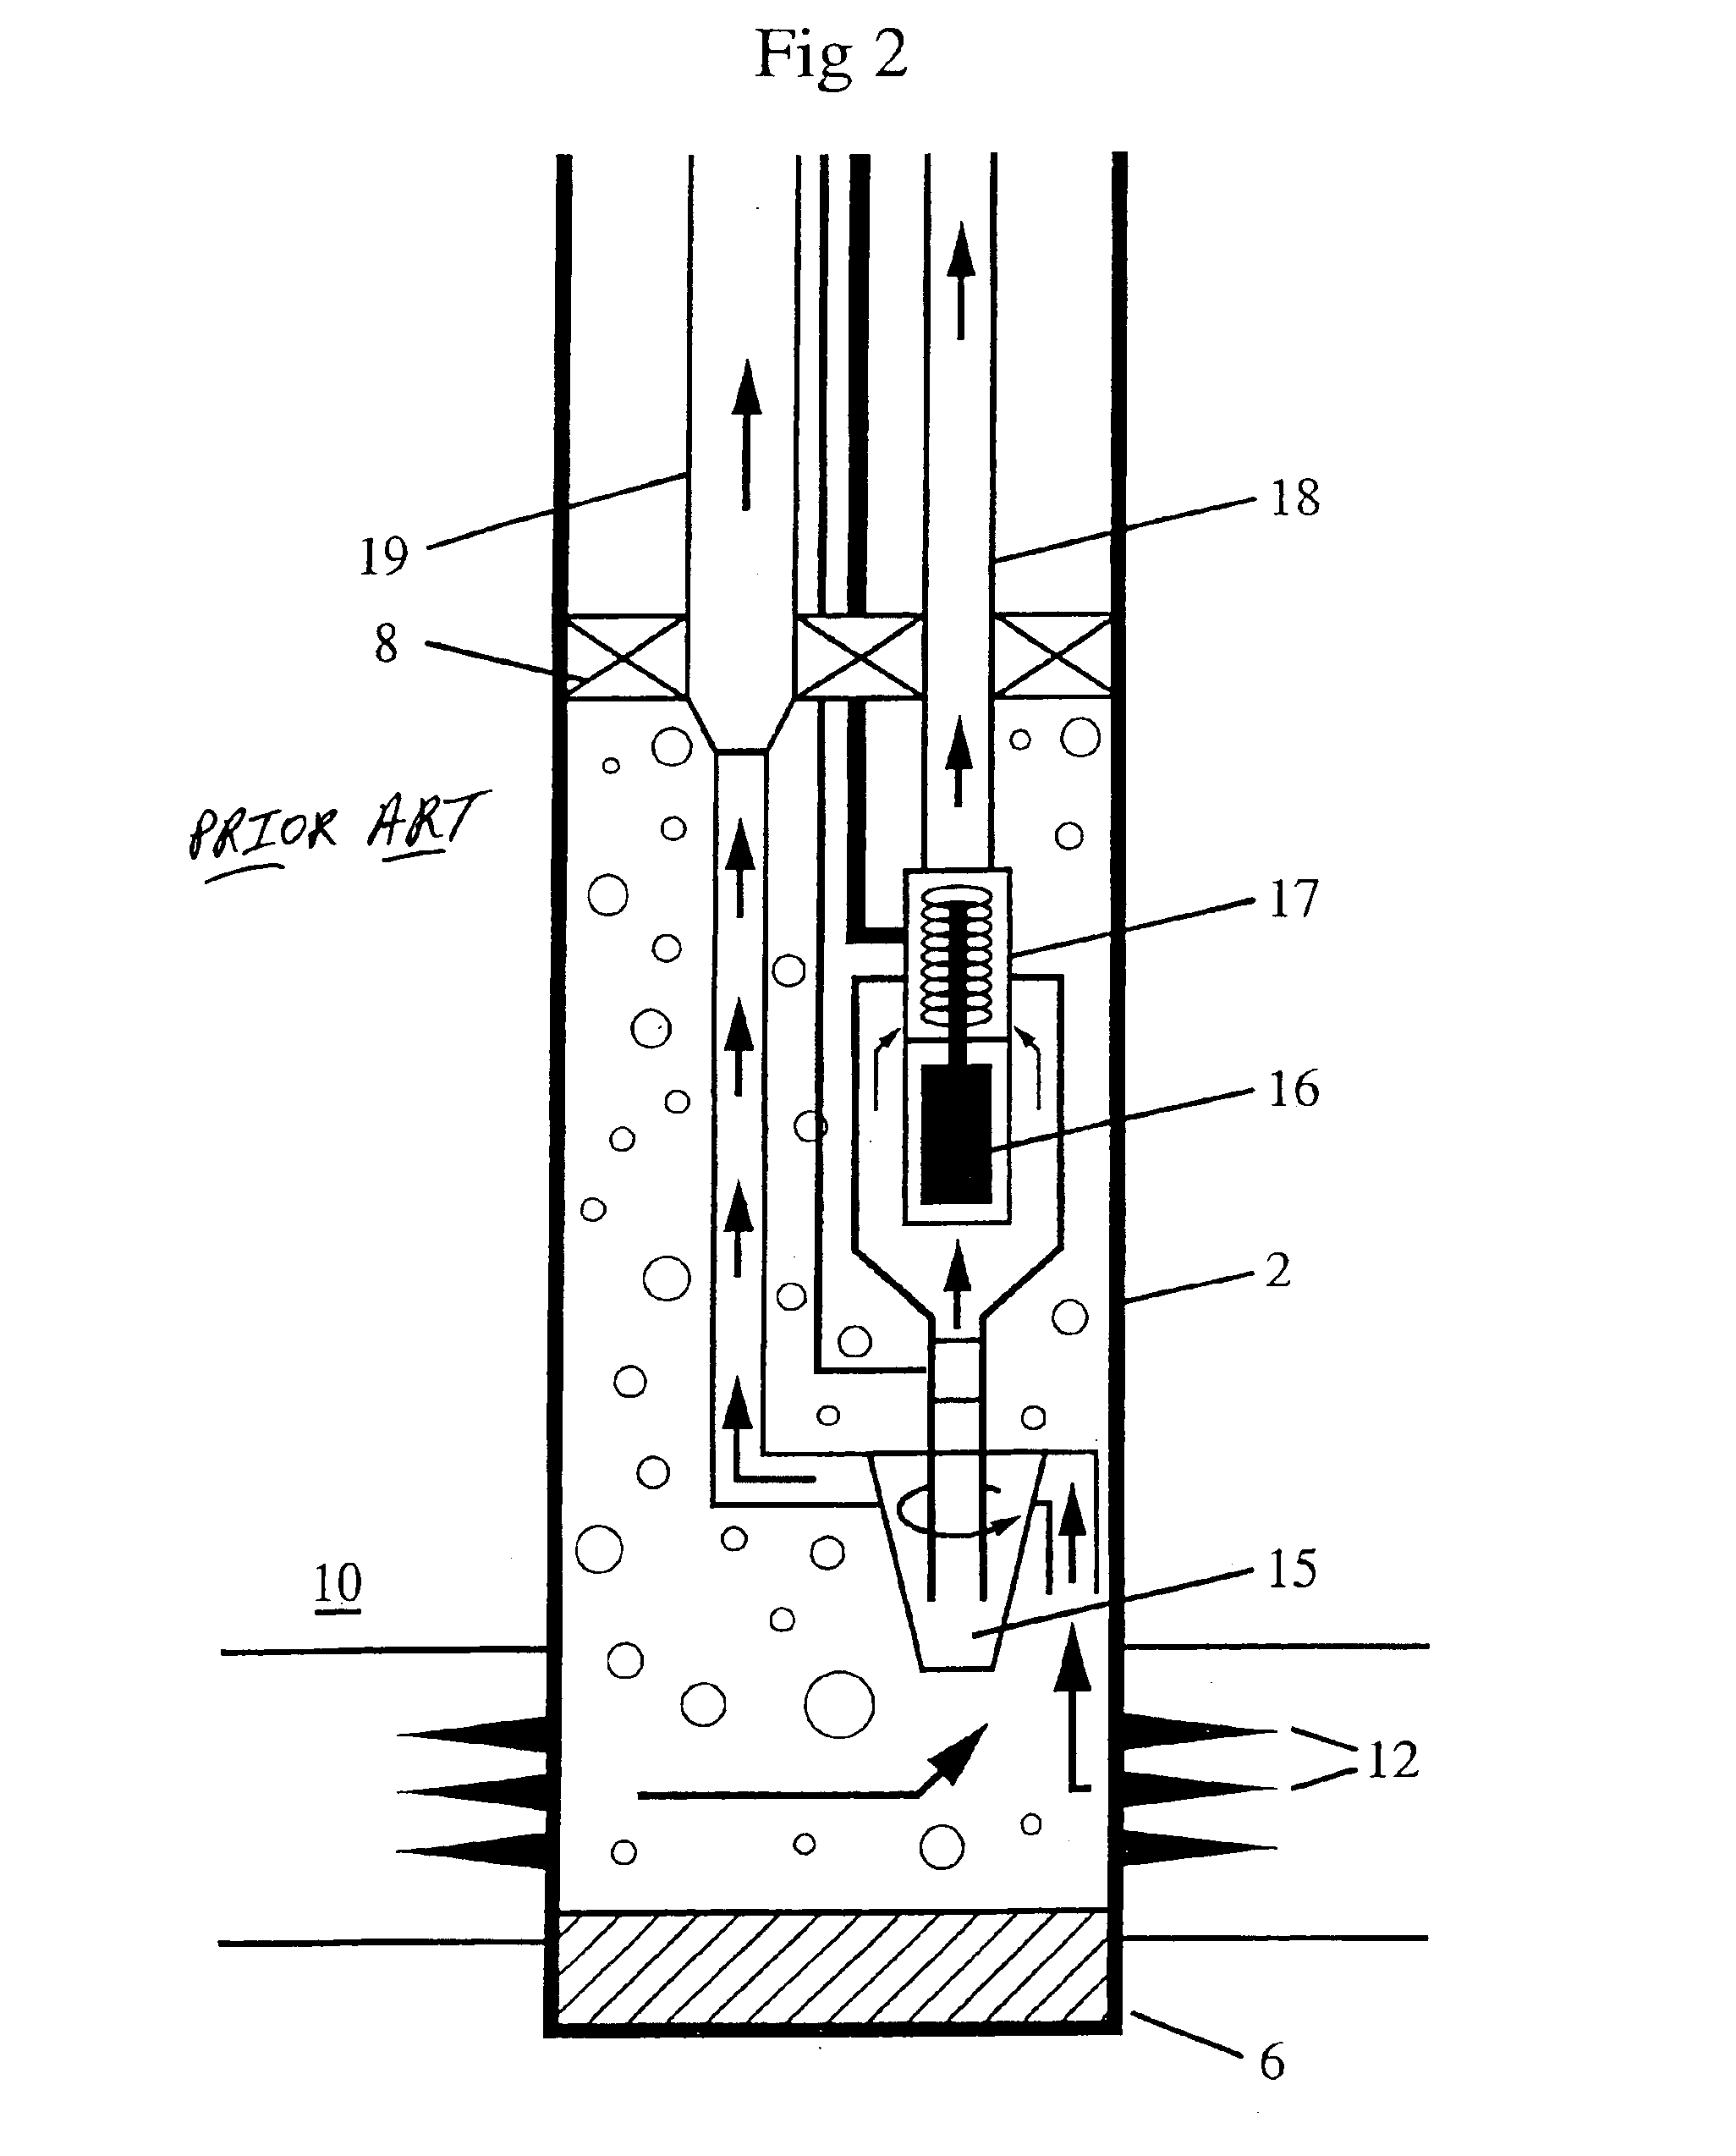 Method and apparatus for separating liquid from a multi-phase liquid/gas stream